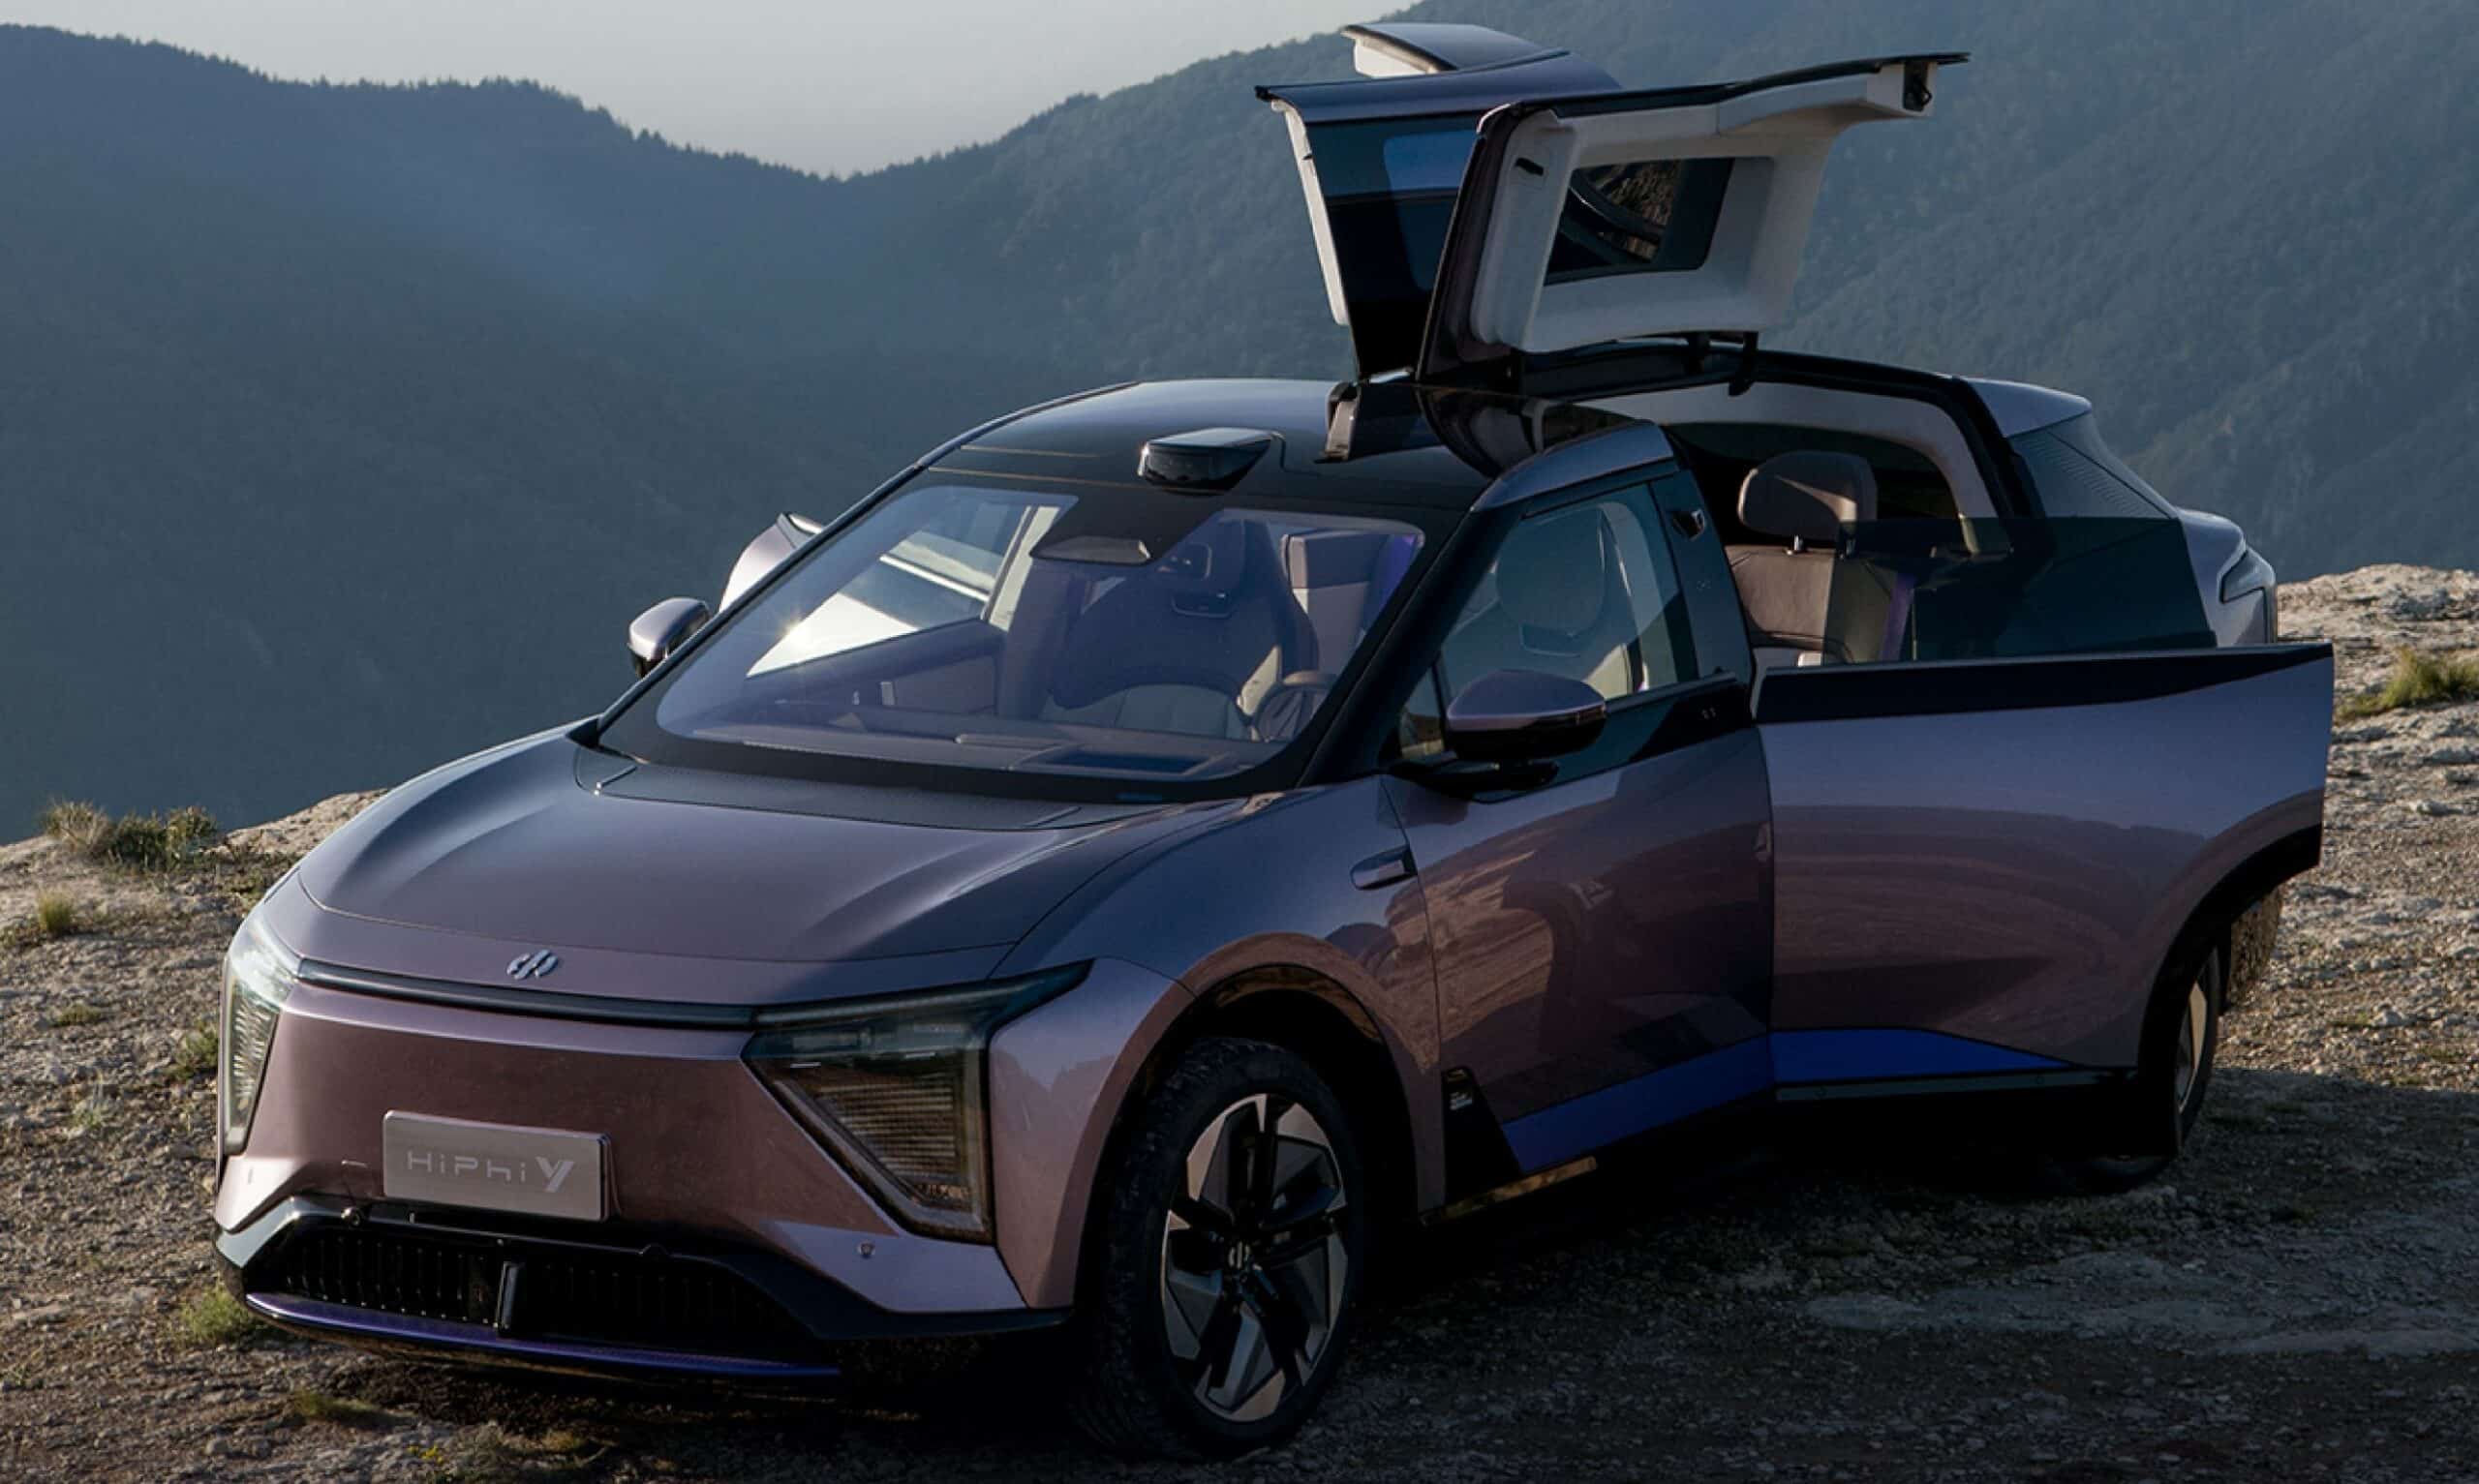 HiPhi Y electric SUV to launch on July 15 for 52,200 USD. Nio ES6 competitor